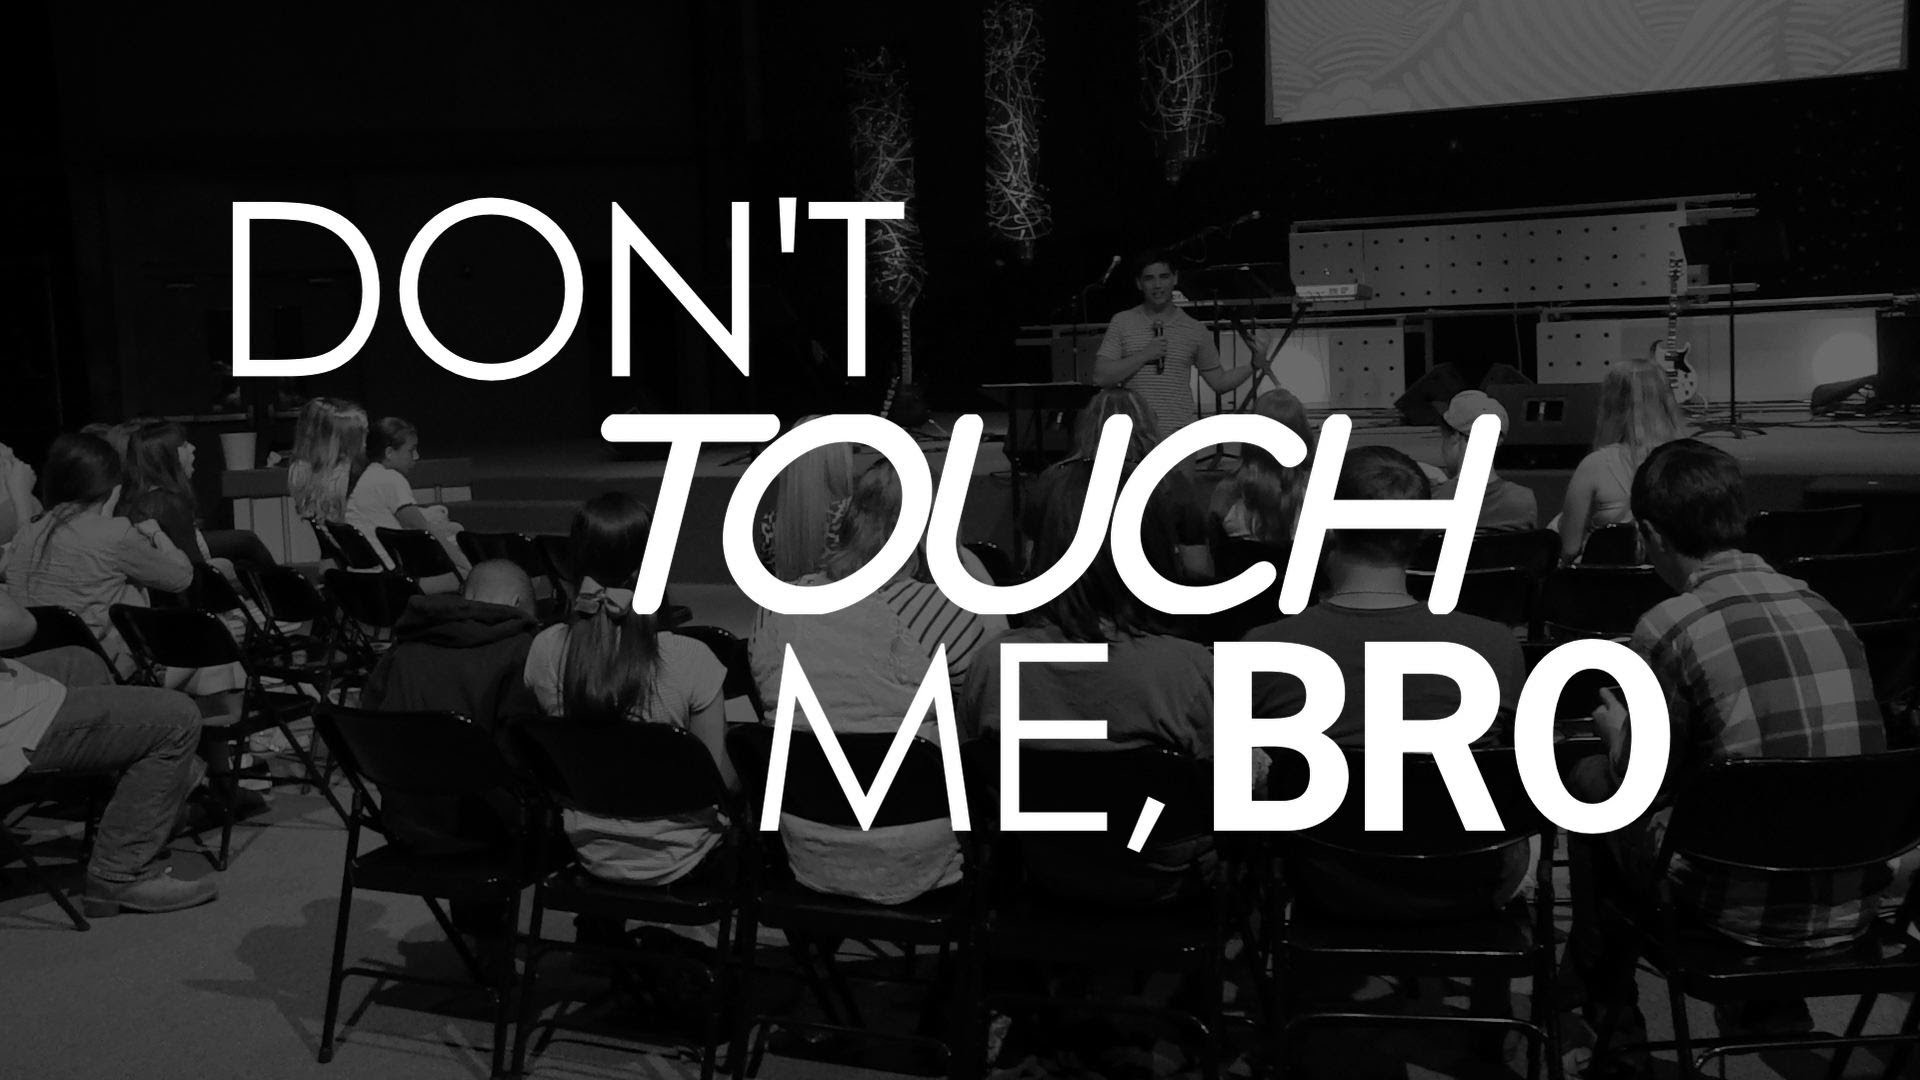 1920x1080 Don't Touch Me Bro!